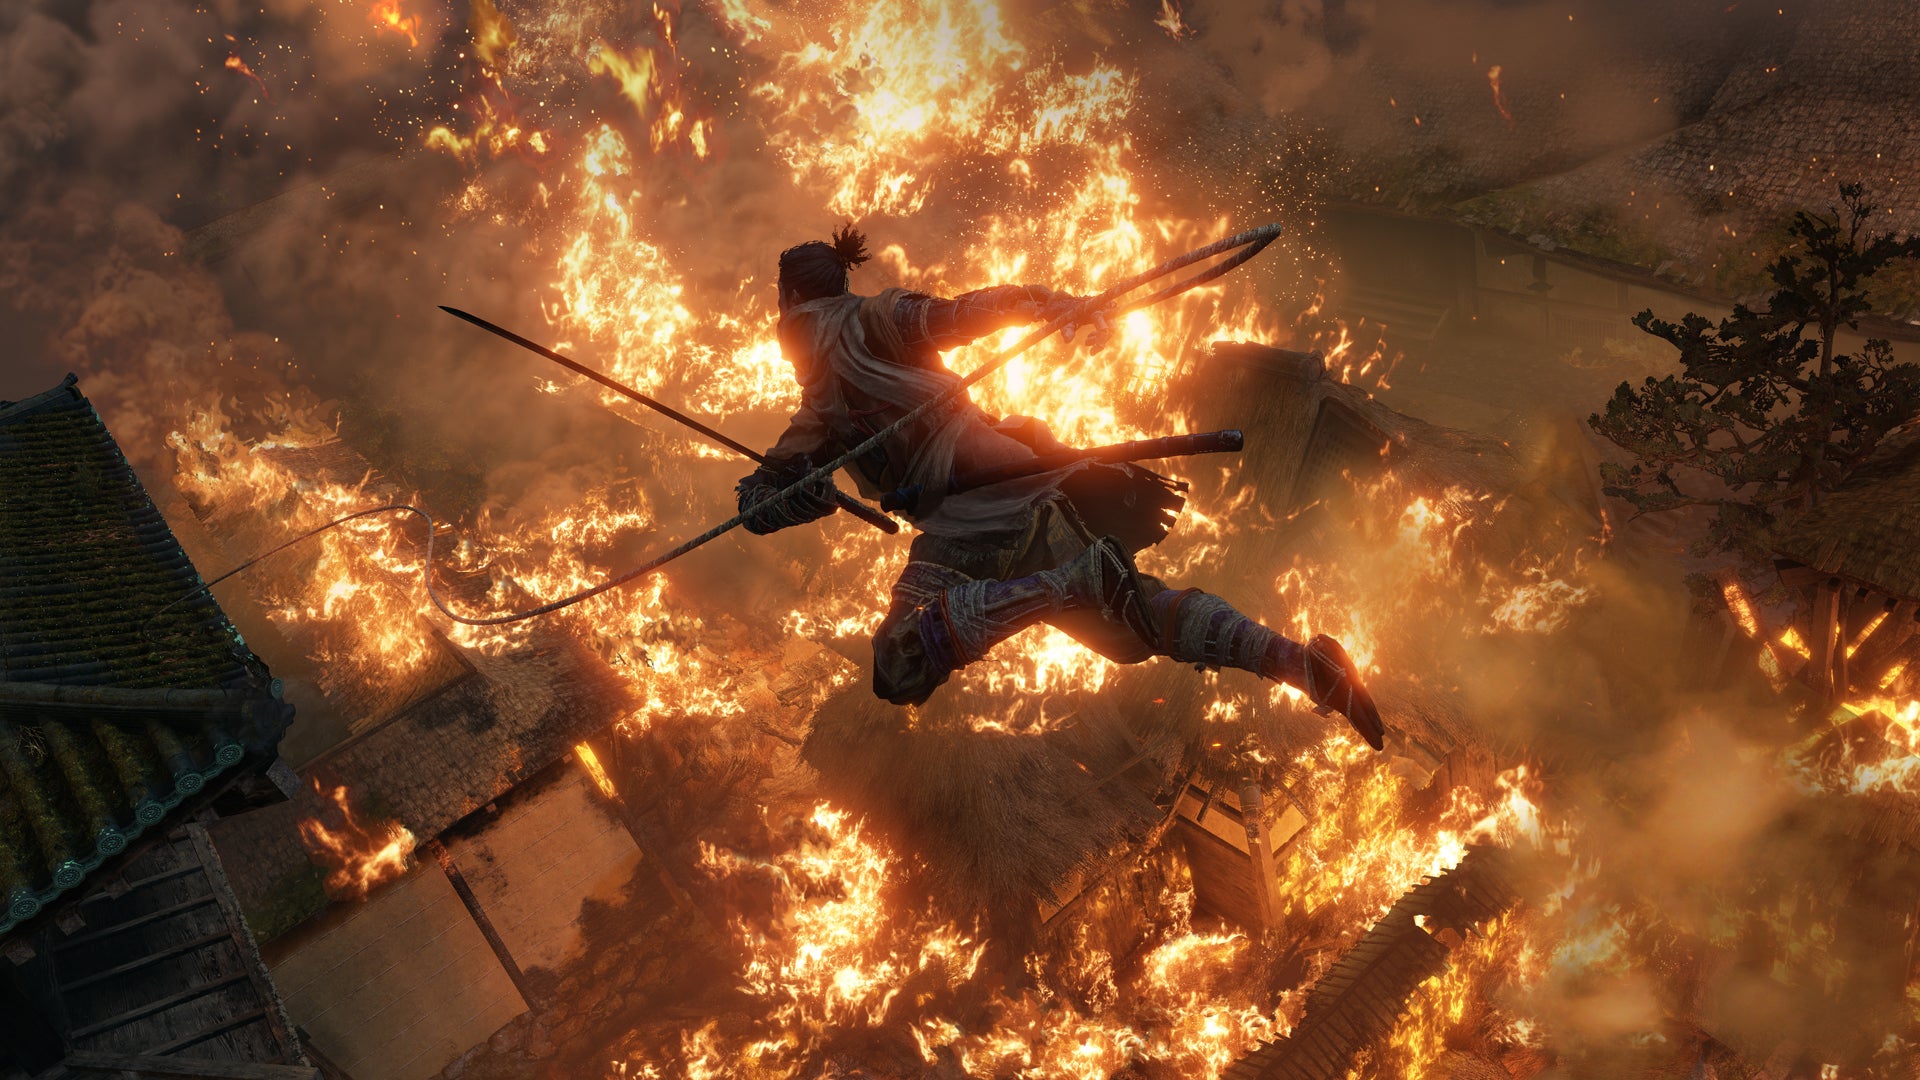 Image for Sekiro: Shadows Die Twice moved over 2 million copies in less than 10 days